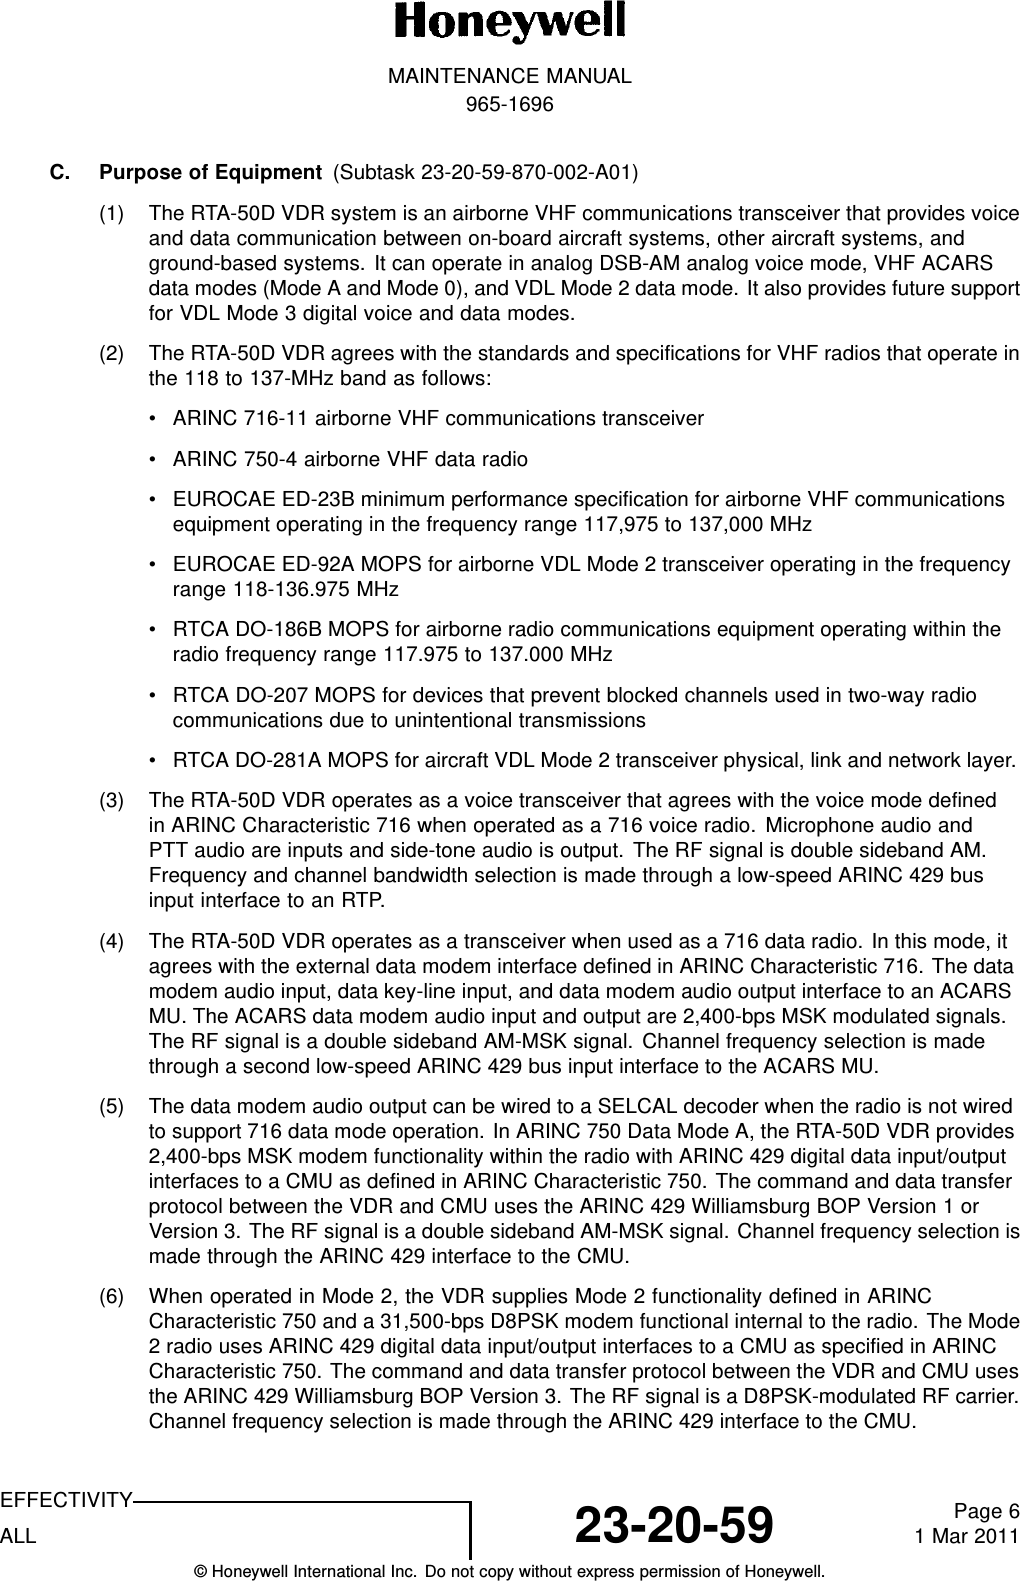 MAINTENANCE MANUAL965-1696C. Purpose of Equipment (Subtask 23-20-59-870-002-A01)(1) The RTA-50D VDR system is an airborne VHF communications transceiver that provides voiceand data communication between on-board aircraft systems, other aircraft systems, andground-based systems. It can operate in analog DSB-AM analog voice mode, VHF ACARSdata modes (Mode A and Mode 0), and VDL Mode 2 data mode. It also provides future supportfor VDL Mode 3 digital voice and data modes.(2) The RTA-50D VDR agrees with the standards and specifications for VHF radios that operate inthe 118 to 137-MHz band as follows:• ARINC 716-11 airborne VHF communications transceiver• ARINC 750-4 airborne VHF data radio• EUROCAE ED-23B minimum performance specification for airborne VHF communicationsequipment operating in the frequency range 117,975 to 137,000 MHz• EUROCAE ED-92A MOPS for airborne VDL Mode 2 transceiver operating in the frequencyrange 118-136.975 MHz• RTCA DO-186B MOPS for airborne radio communications equipment operating within theradio frequency range 117.975 to 137.000 MHz• RTCA DO-207 MOPS for devices that prevent blocked channels used in two-way radiocommunications due to unintentional transmissions• RTCA DO-281A MOPS for aircraft VDL Mode 2 transceiver physical, link and network layer.(3) The RTA-50D VDR operates as a voice transceiver that agrees with the voice mode definedin ARINC Characteristic 716 when operated as a 716 voice radio. Microphone audio andPTT audio are inputs and side-tone audio is output. The RF signal is double sideband AM.Frequency and channel bandwidth selection is made through a low-speed ARINC 429 businput interface to an RTP.(4) The RTA-50D VDR operates as a transceiver when used as a 716 data radio. In this mode, itagrees with the external data modem interface defined in ARINC Characteristic 716. The datamodem audio input, data key-line input, and data modem audio output interface to an ACARSMU. The ACARS data modem audio input and output are 2,400-bps MSK modulated signals.The RF signal is a double sideband AM-MSK signal. Channel frequency selection is madethrough a second low-speed ARINC 429 bus input interface to the ACARS MU.(5) The data modem audio output can be wired to a SELCAL decoder when the radio is not wiredto support 716 data mode operation. In ARINC 750 Data Mode A, the RTA-50D VDR provides2,400-bps MSK modem functionality within the radio with ARINC 429 digital data input/outputinterfaces to a CMU as defined in ARINC Characteristic 750. The command and data transferprotocol between the VDR and CMU uses the ARINC 429 Williamsburg BOP Version 1 orVersion 3. The RF signal is a double sideband AM-MSK signal. Channel frequency selection ismade through the ARINC 429 interface to the CMU.(6) When operated in Mode 2, the VDR supplies Mode 2 functionality defined in ARINCCharacteristic 750 and a 31,500-bps D8PSK modem functional internal to the radio. The Mode2 radio uses ARINC 429 digital data input/output interfaces to a CMU as specified in ARINCCharacteristic 750. The command and data transfer protocol between the VDR and CMU usesthe ARINC 429 Williamsburg BOP Version 3. The RF signal is a D8PSK-modulated RF carrier.Channel frequency selection is made through the ARINC 429 interface to the CMU.EFFECTIVITYALL 23-20-59 Page 61 Mar 2011© Honeywell International Inc. Do not copy without express permission of Honeywell.